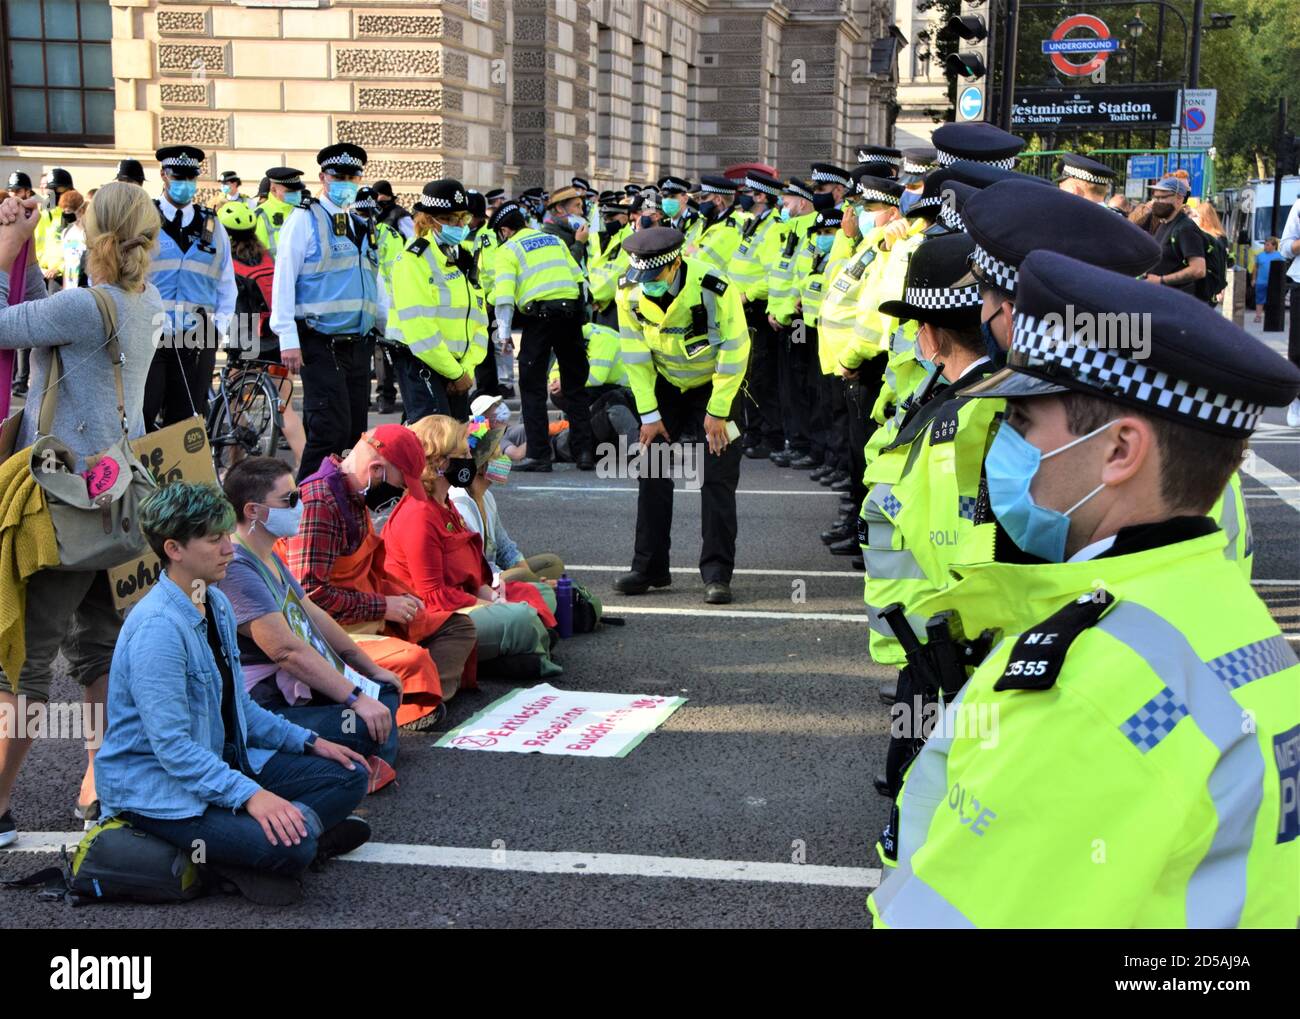 Protesters block the road in Parliament Square during the Extinction Rebellion climate change and animal agriculture protest in London, 1st September 2020 Stock Photo